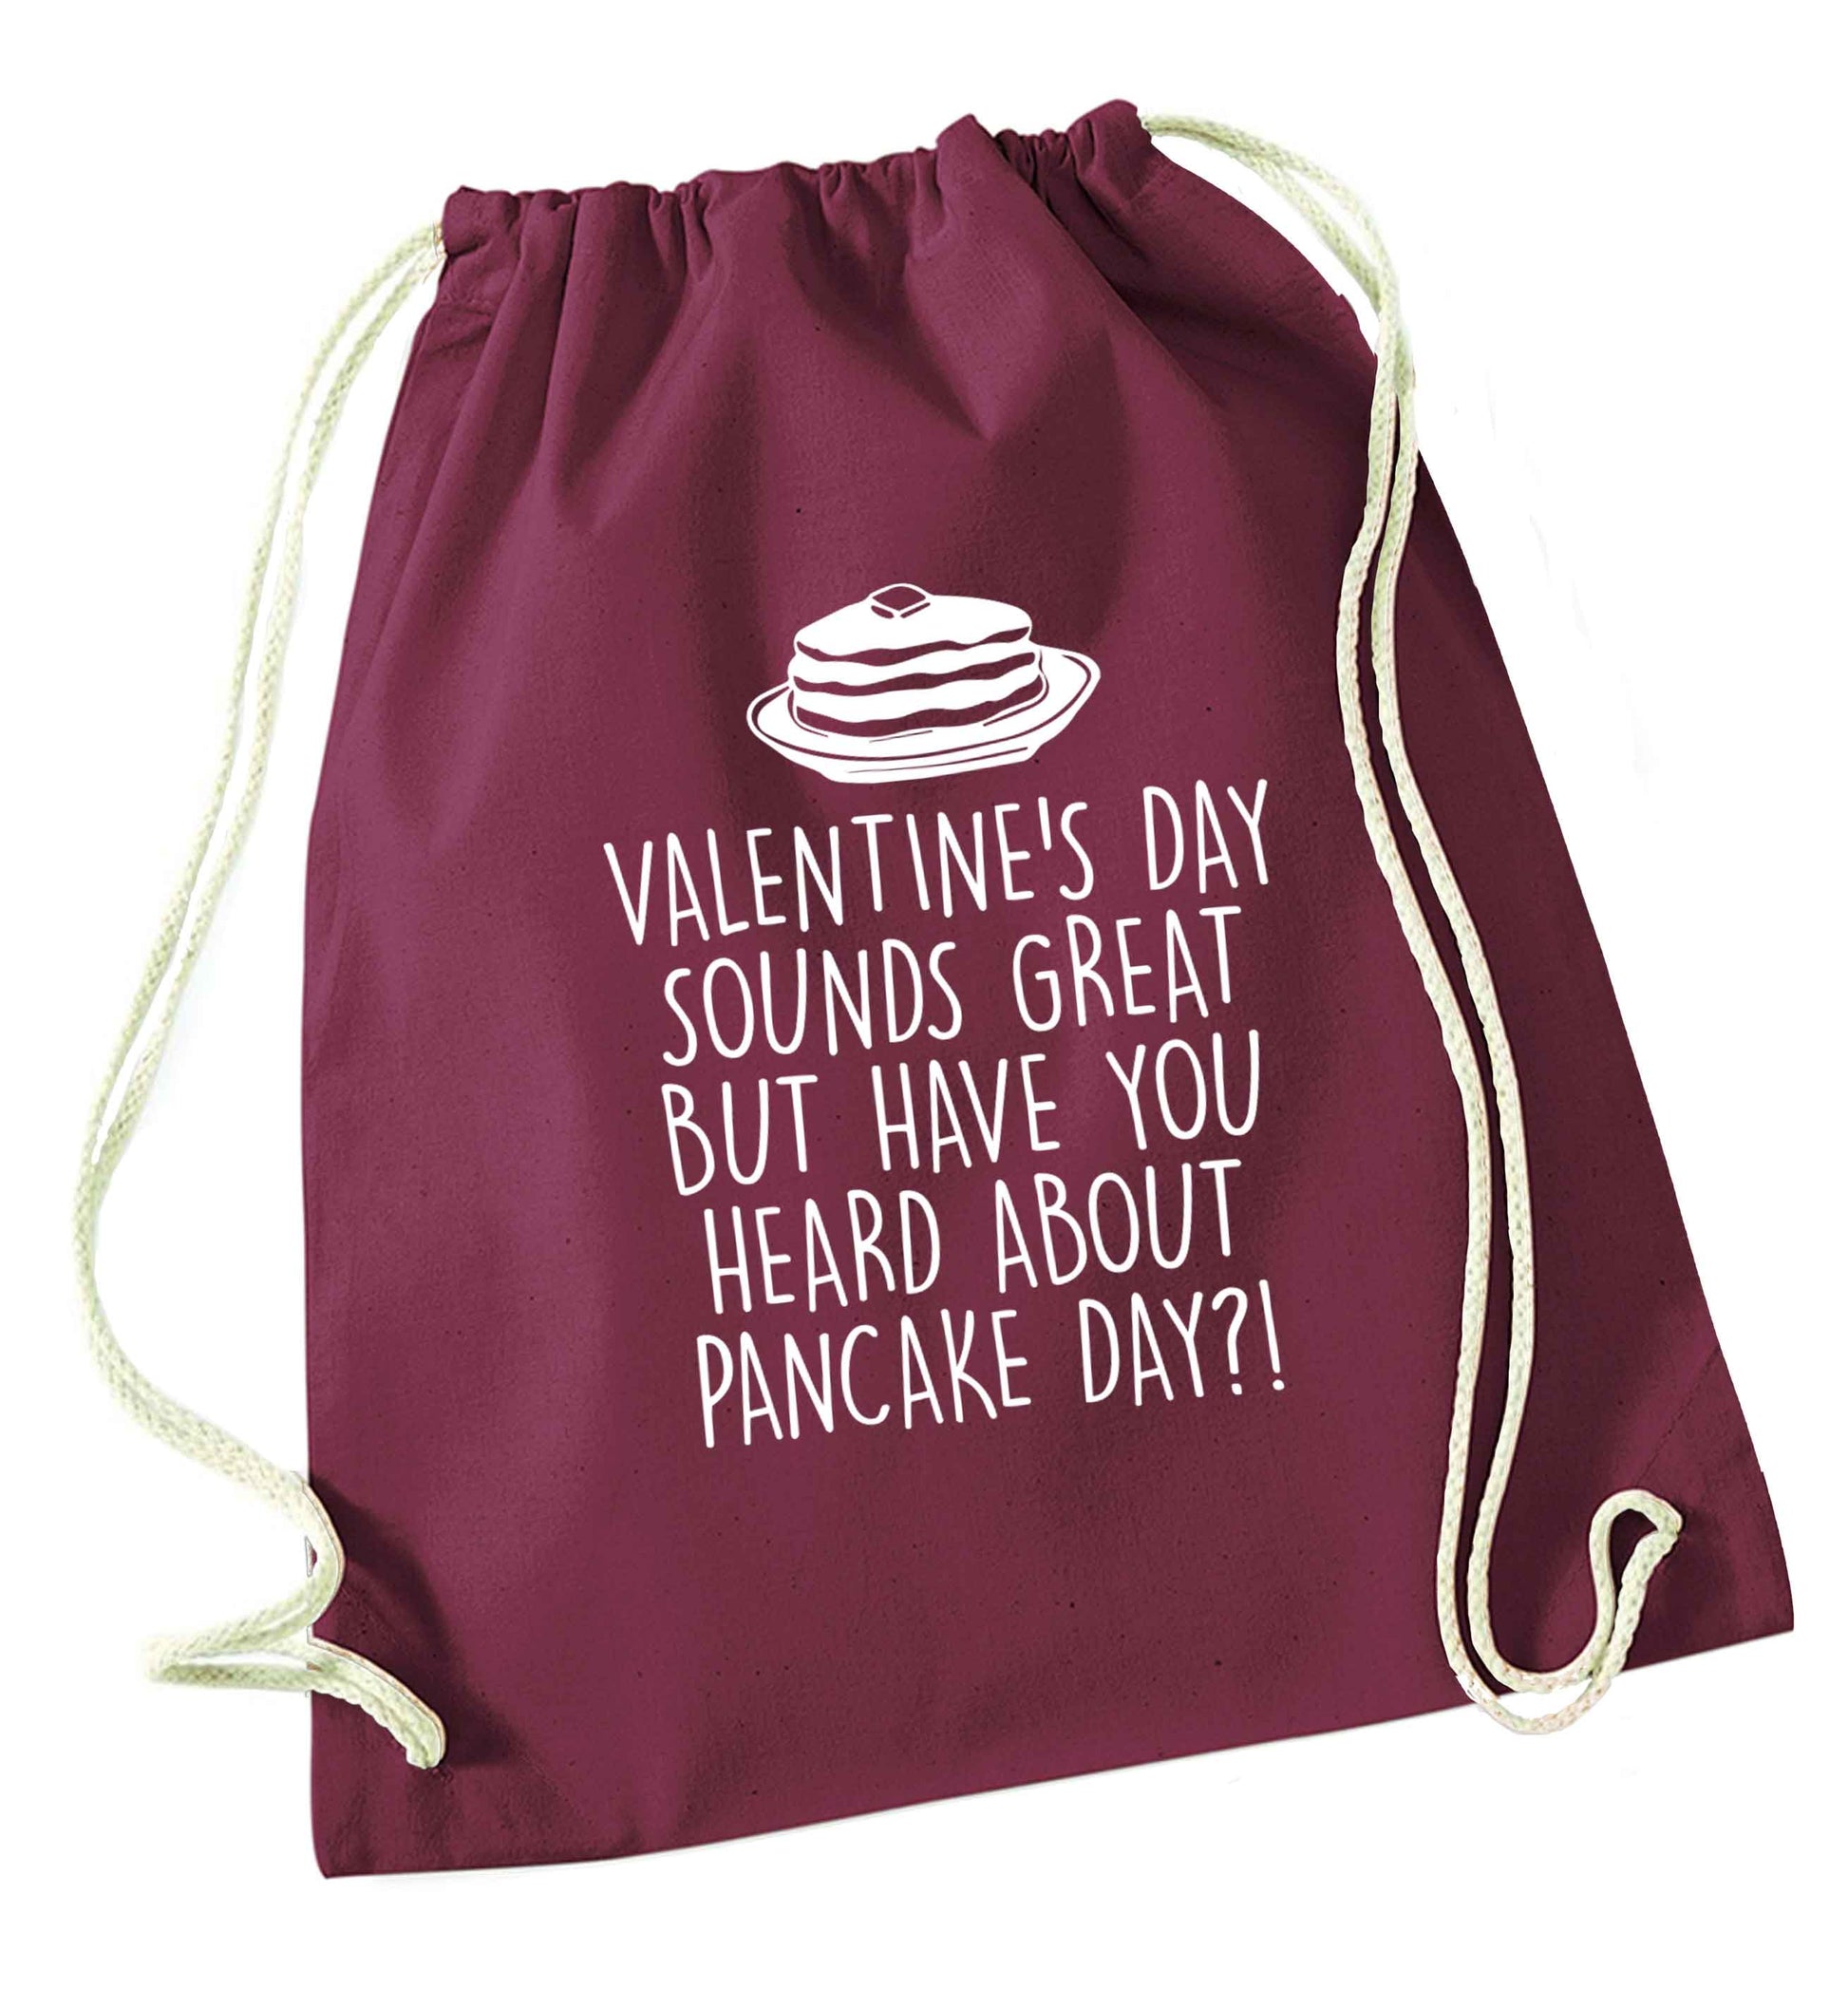 Valentine's day sounds great but have you heard about pancake day?! maroon drawstring bag